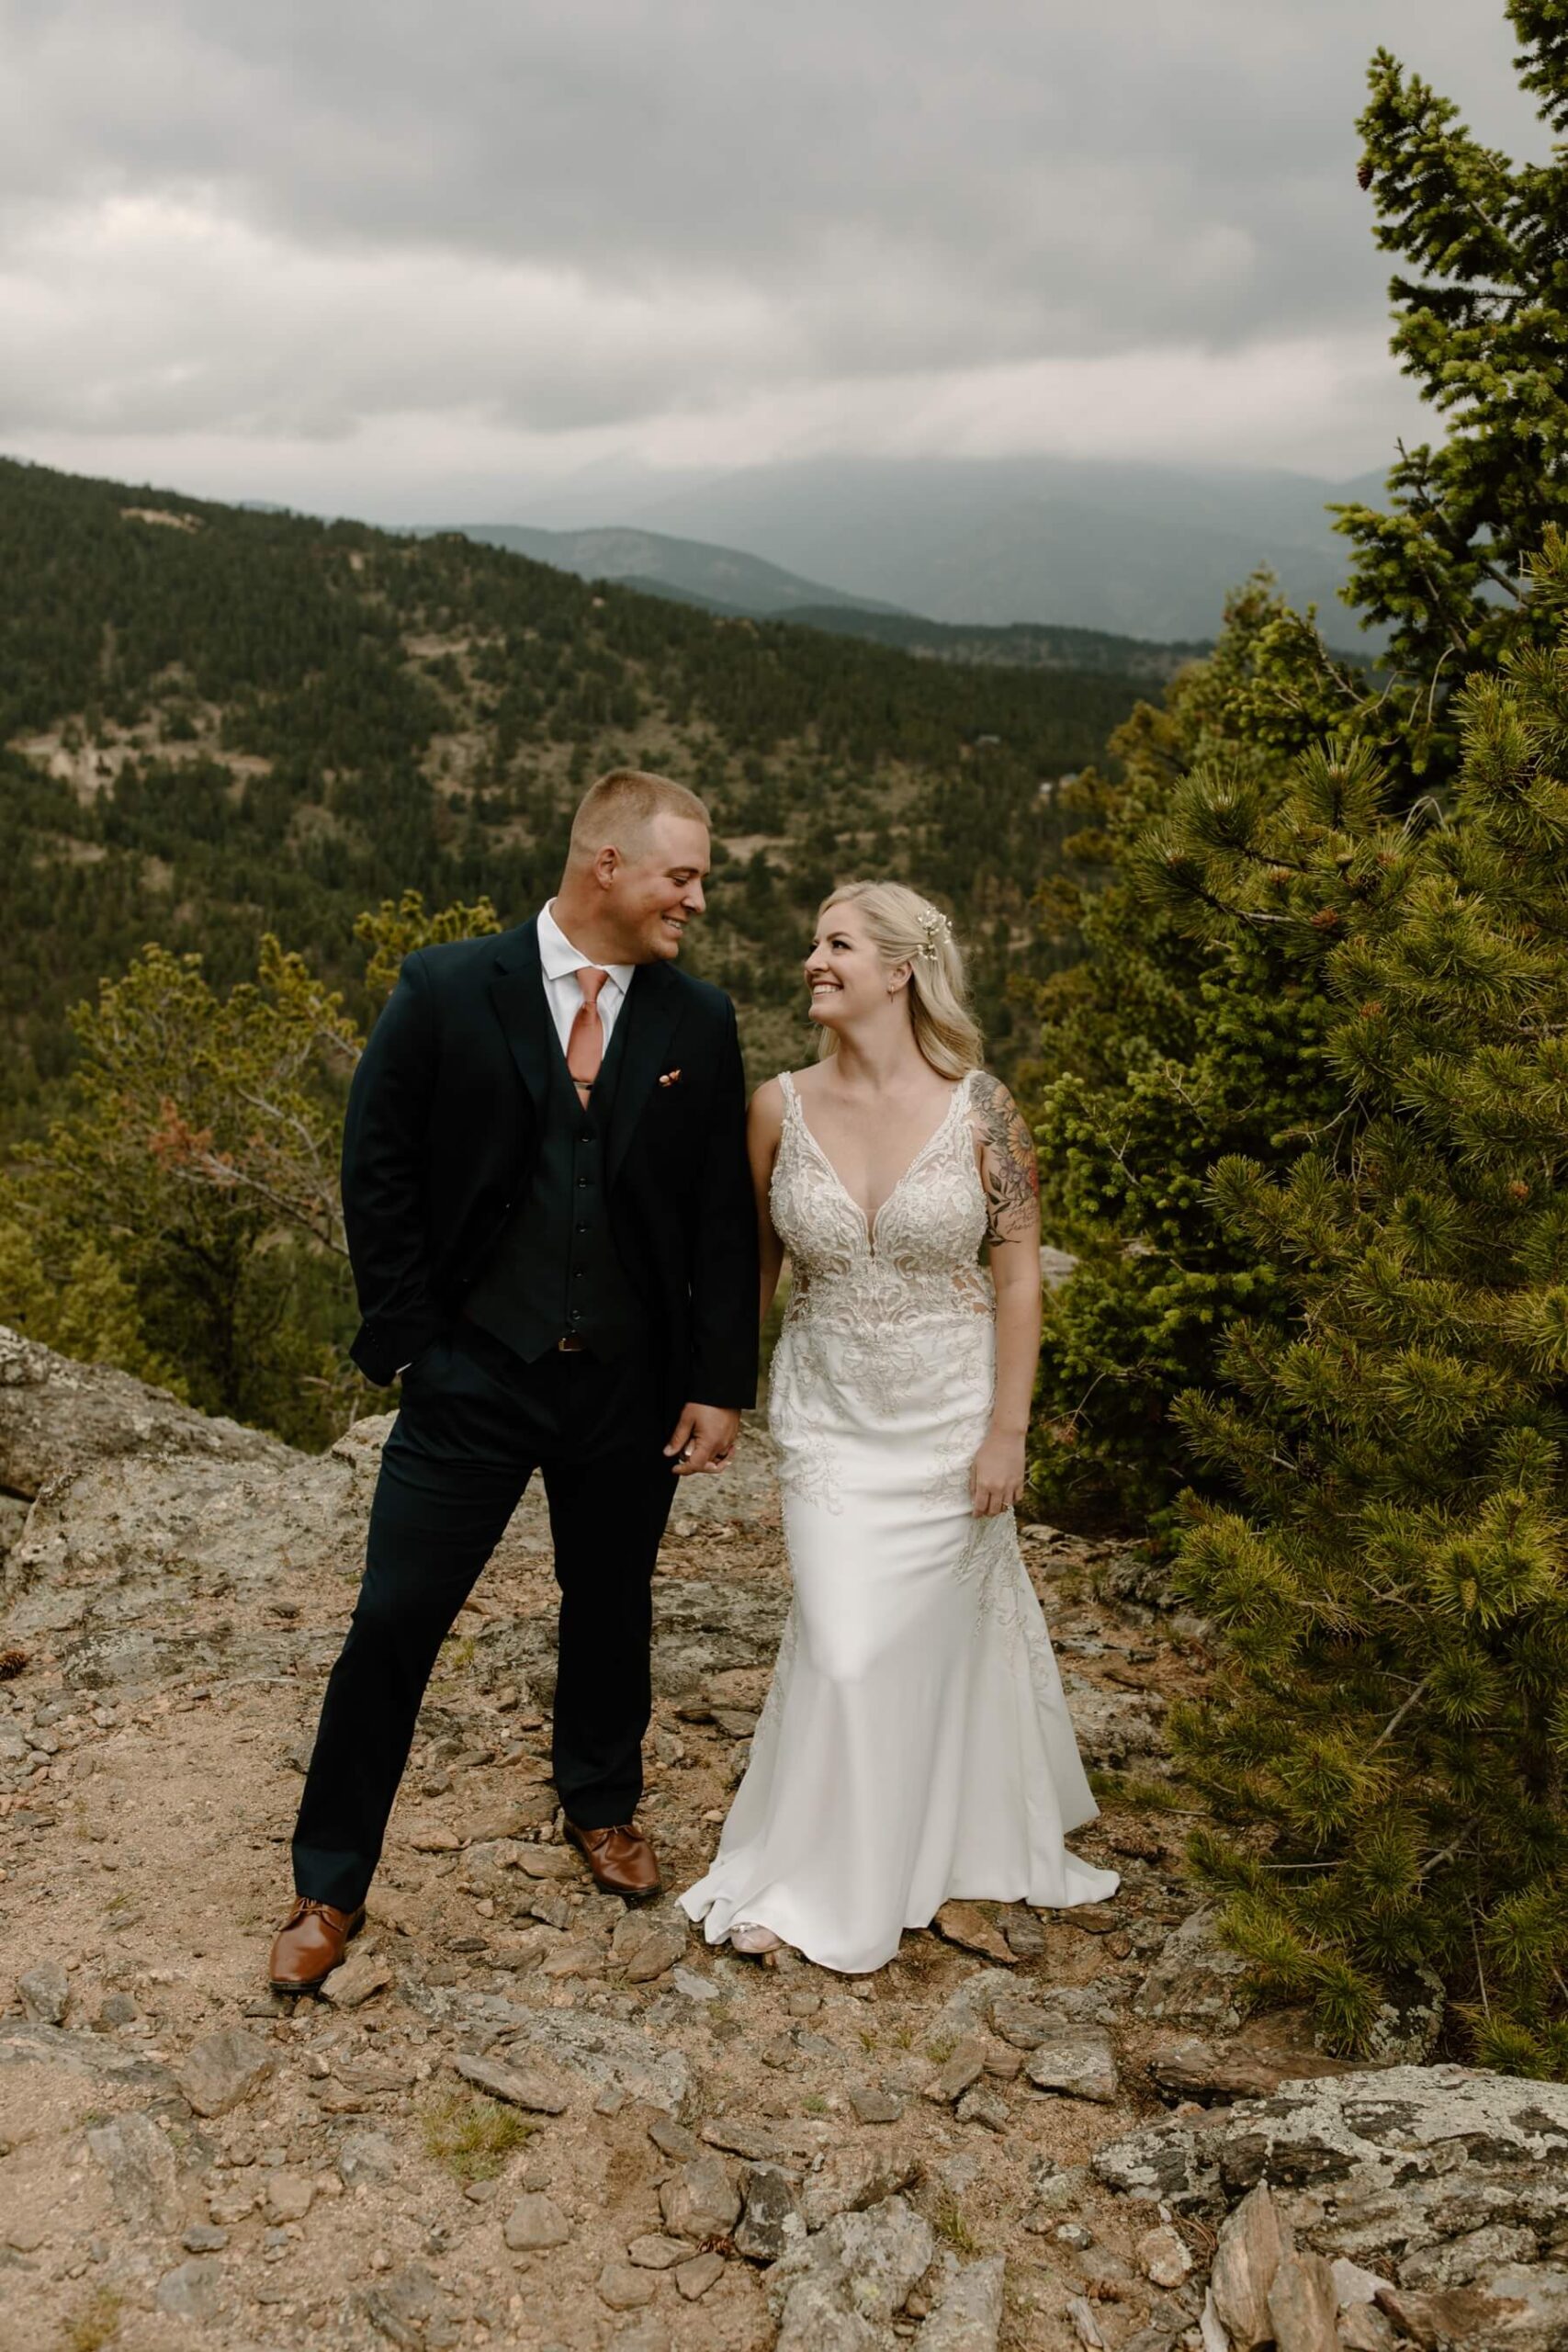 Bride and groom holding hands and looking at each other in front of mountains at North Star Gatherings | McArthur Weddings and Events